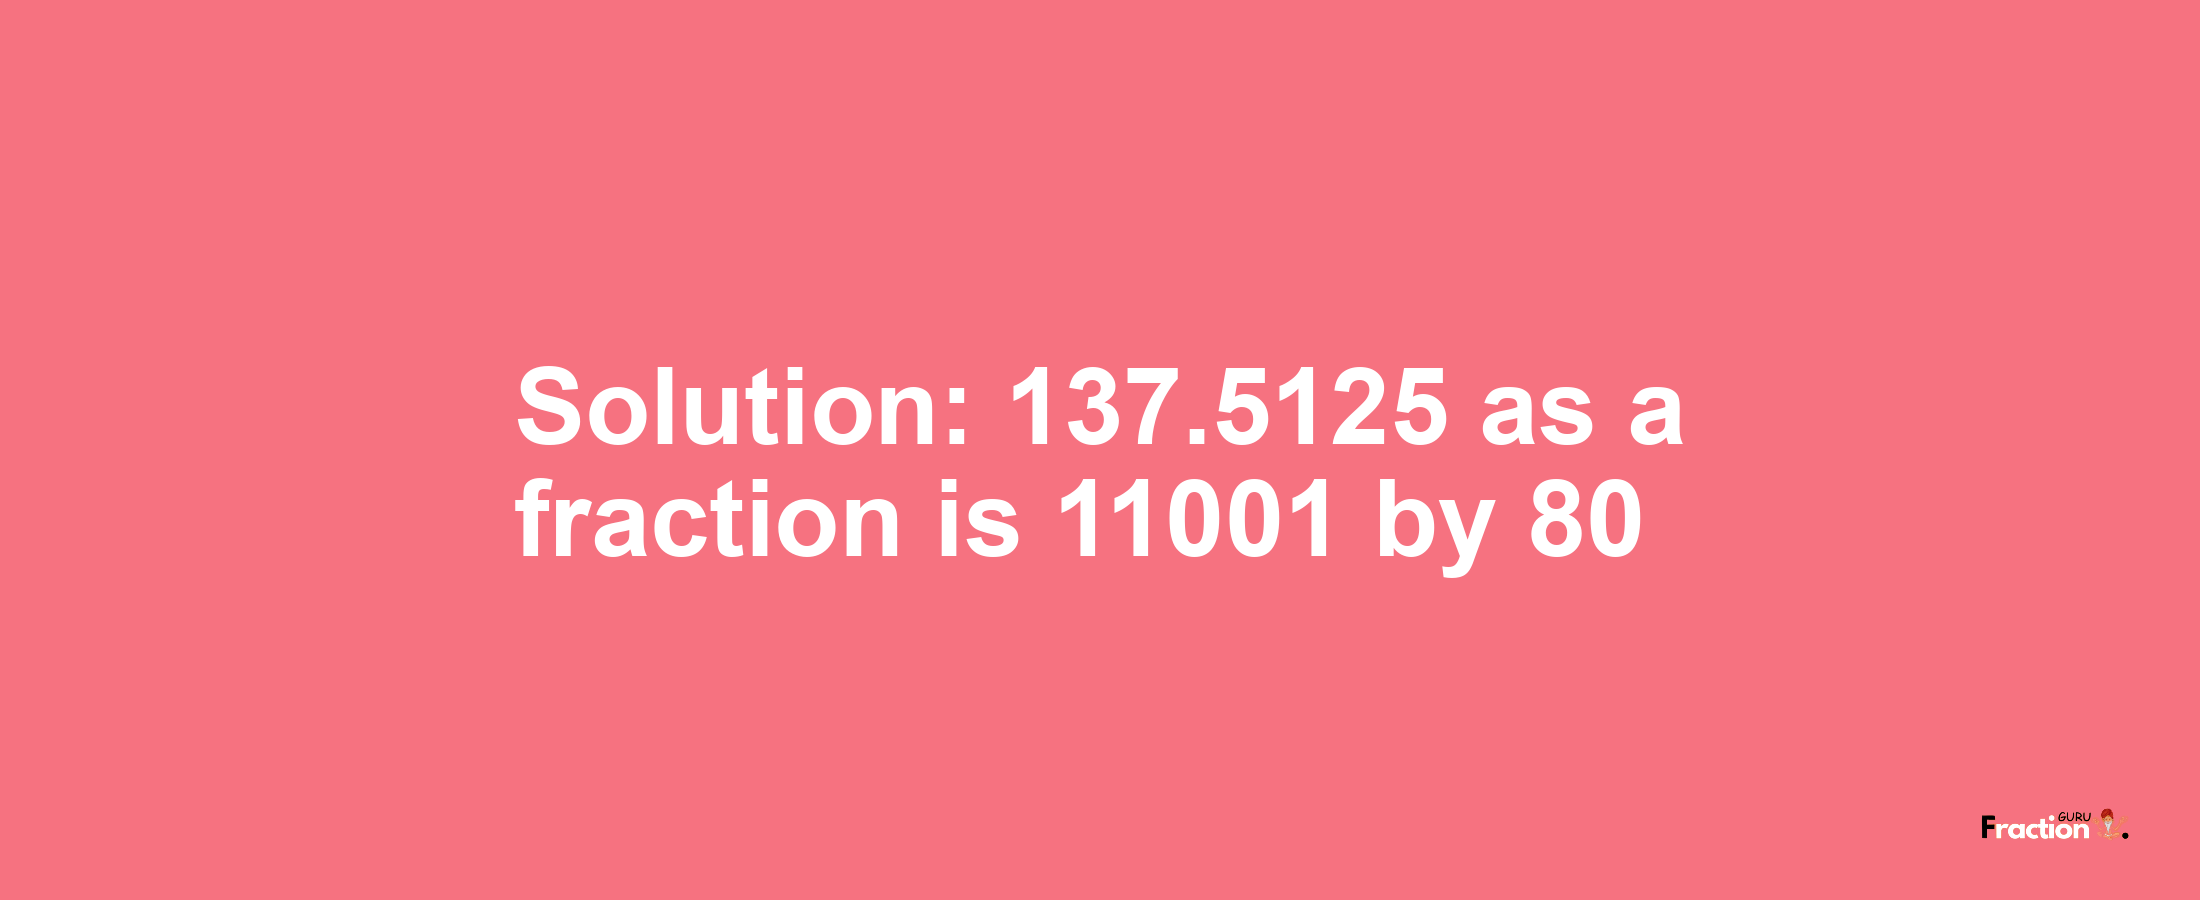 Solution:137.5125 as a fraction is 11001/80